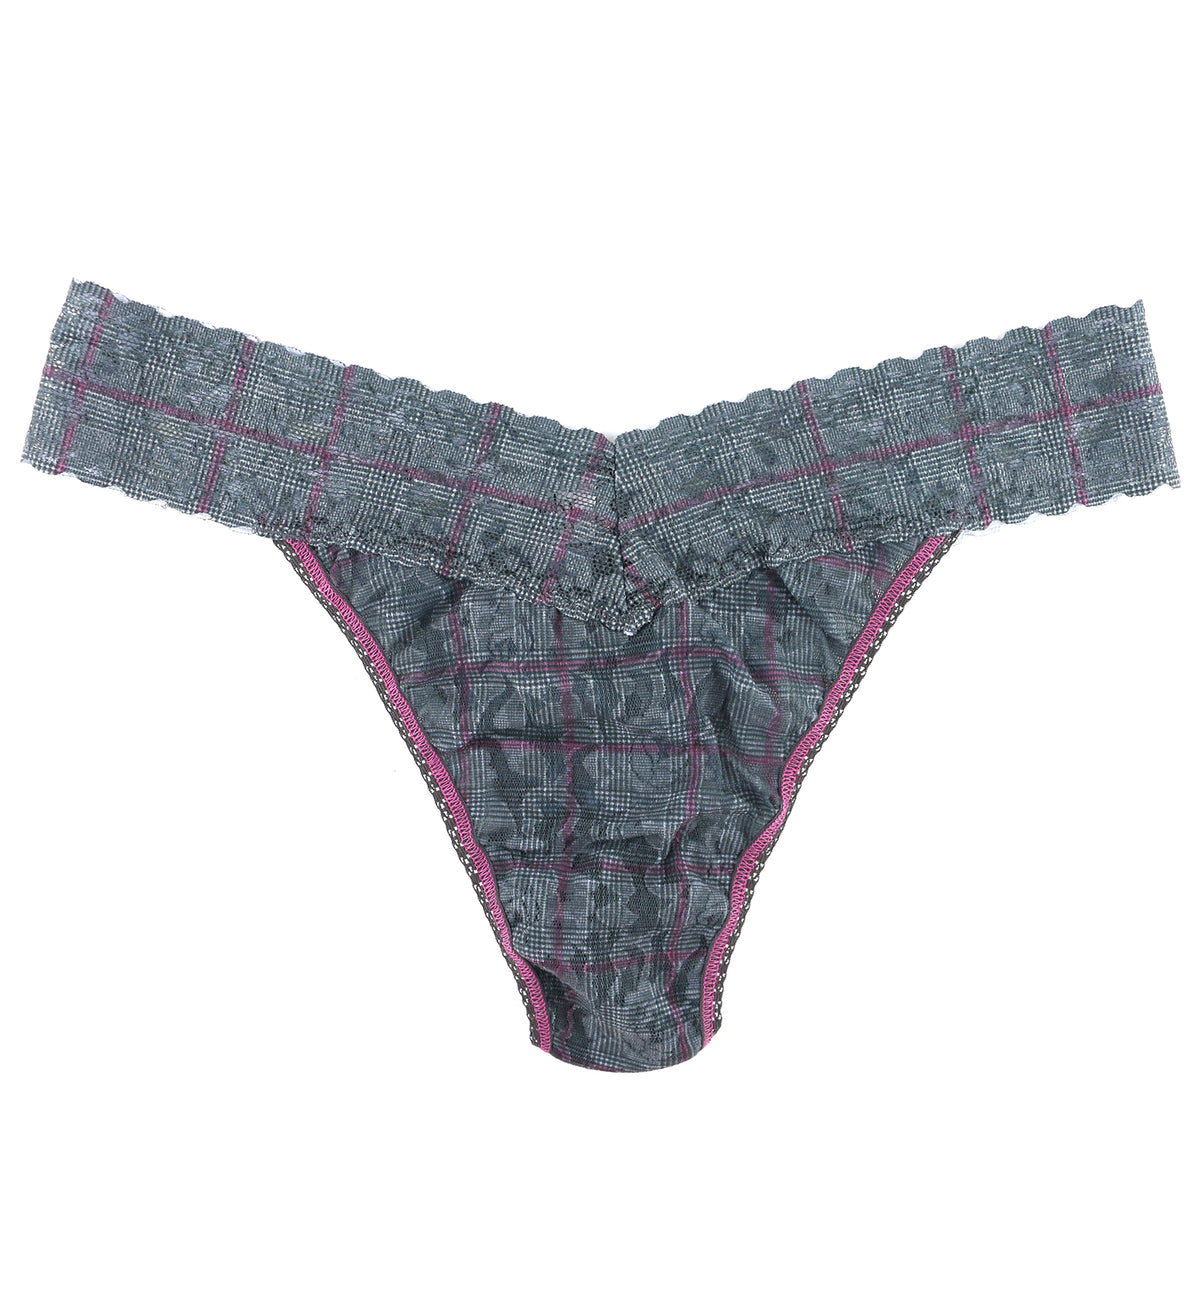 Hanky Panky Signature Lace Printed Original Rise Thong (PR4811P),Academy Check - Academy Check,One Size